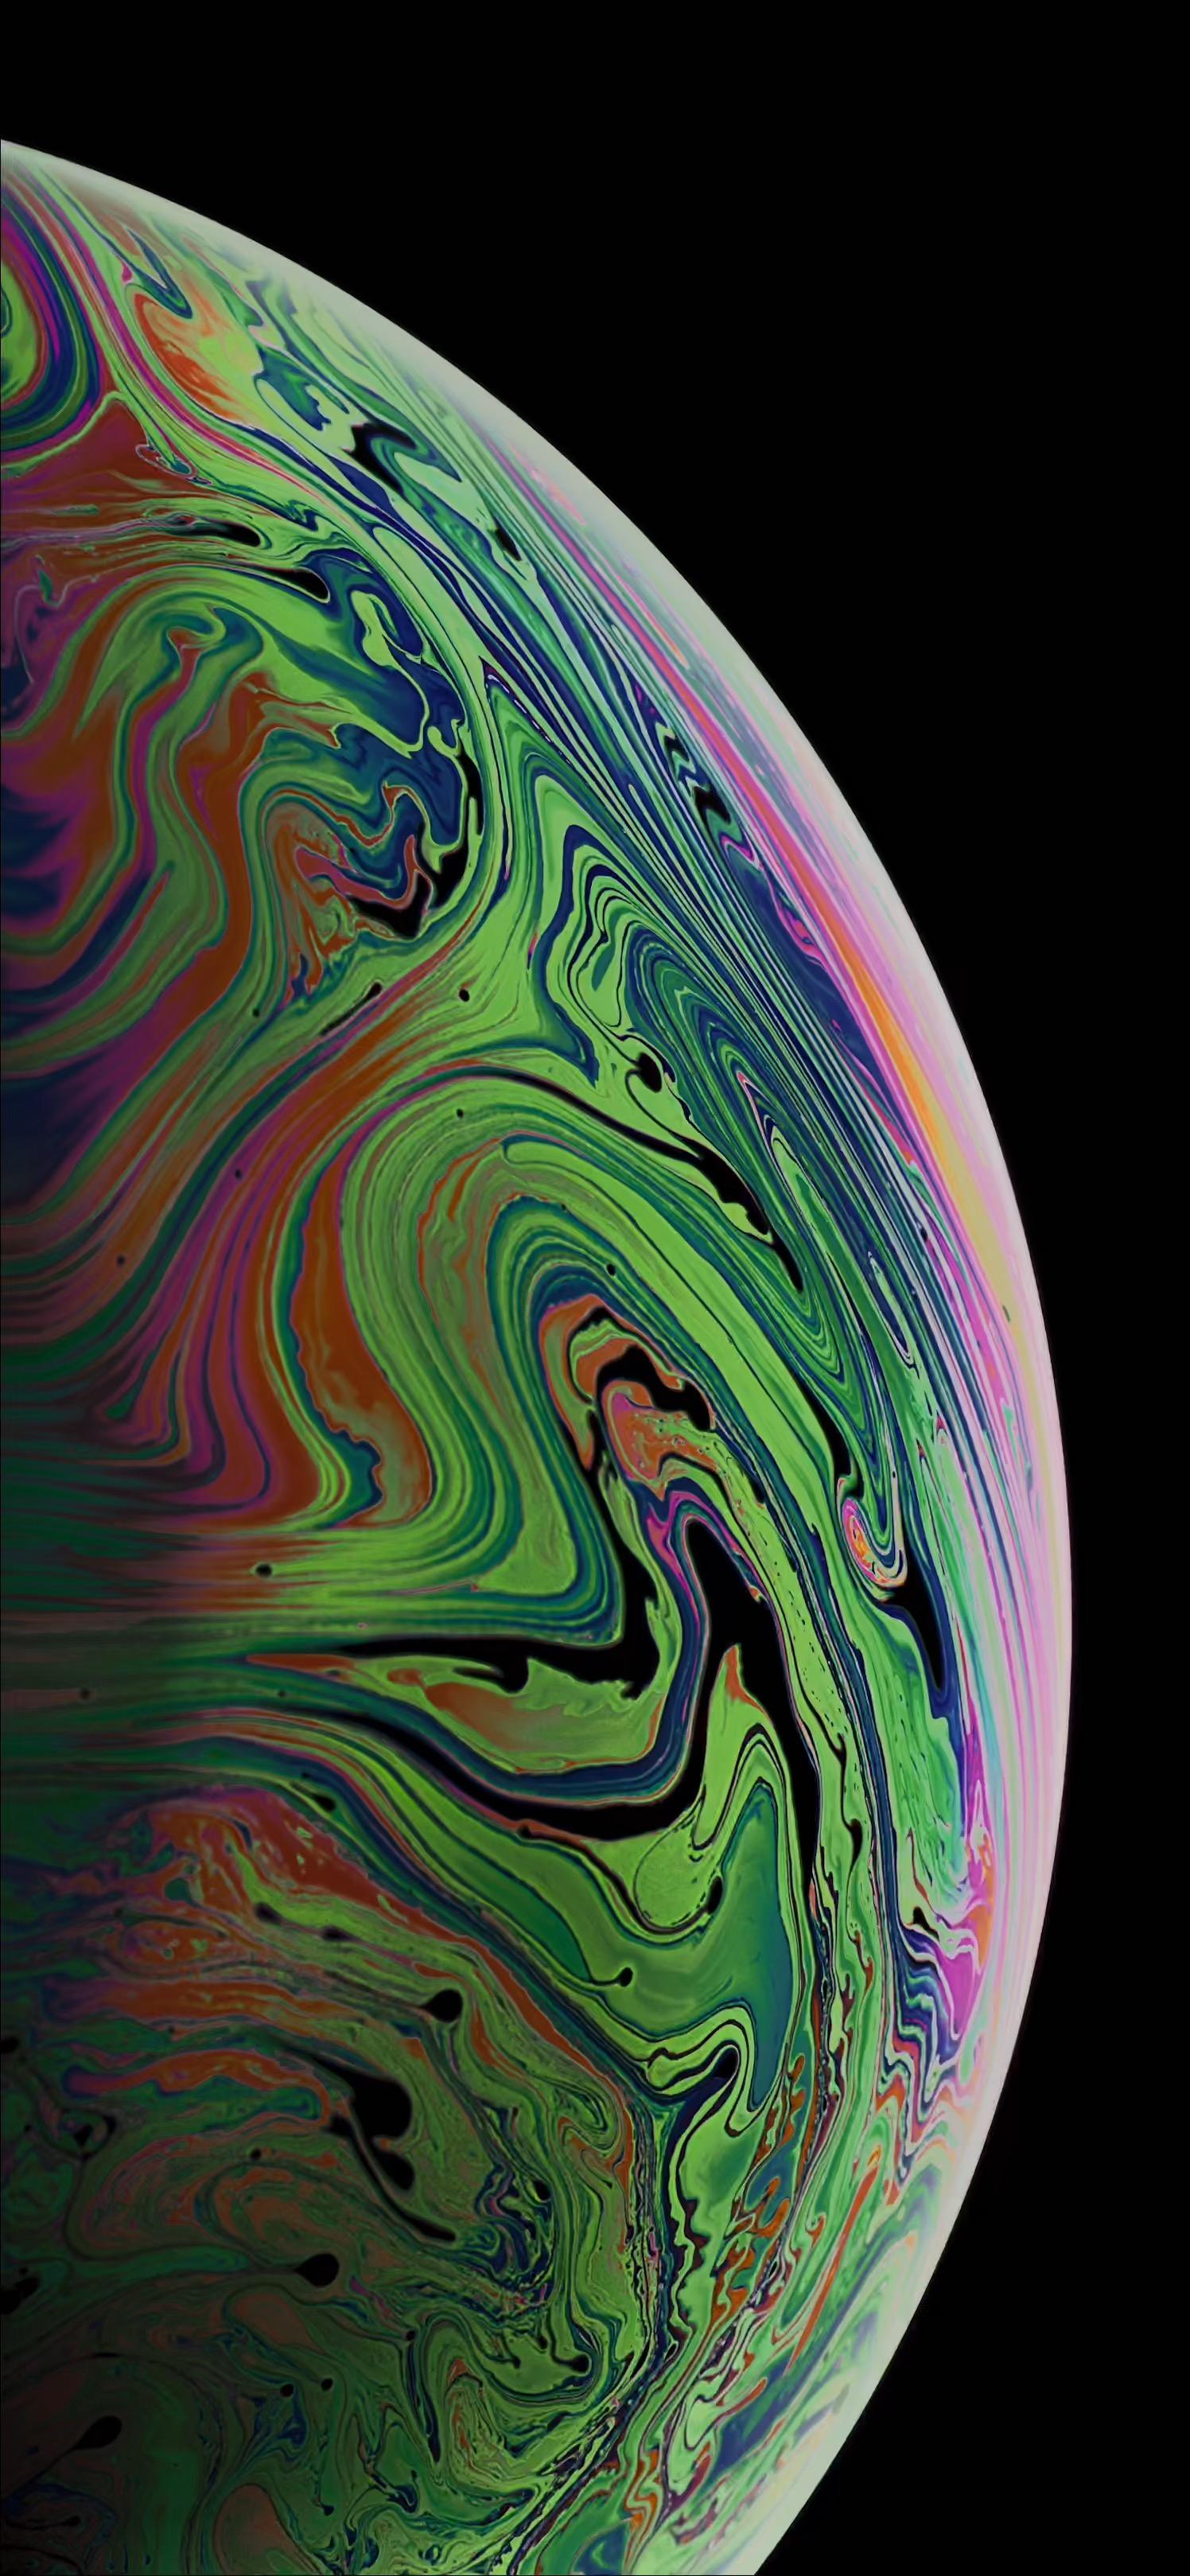 iphone xs max live wallpaper free download